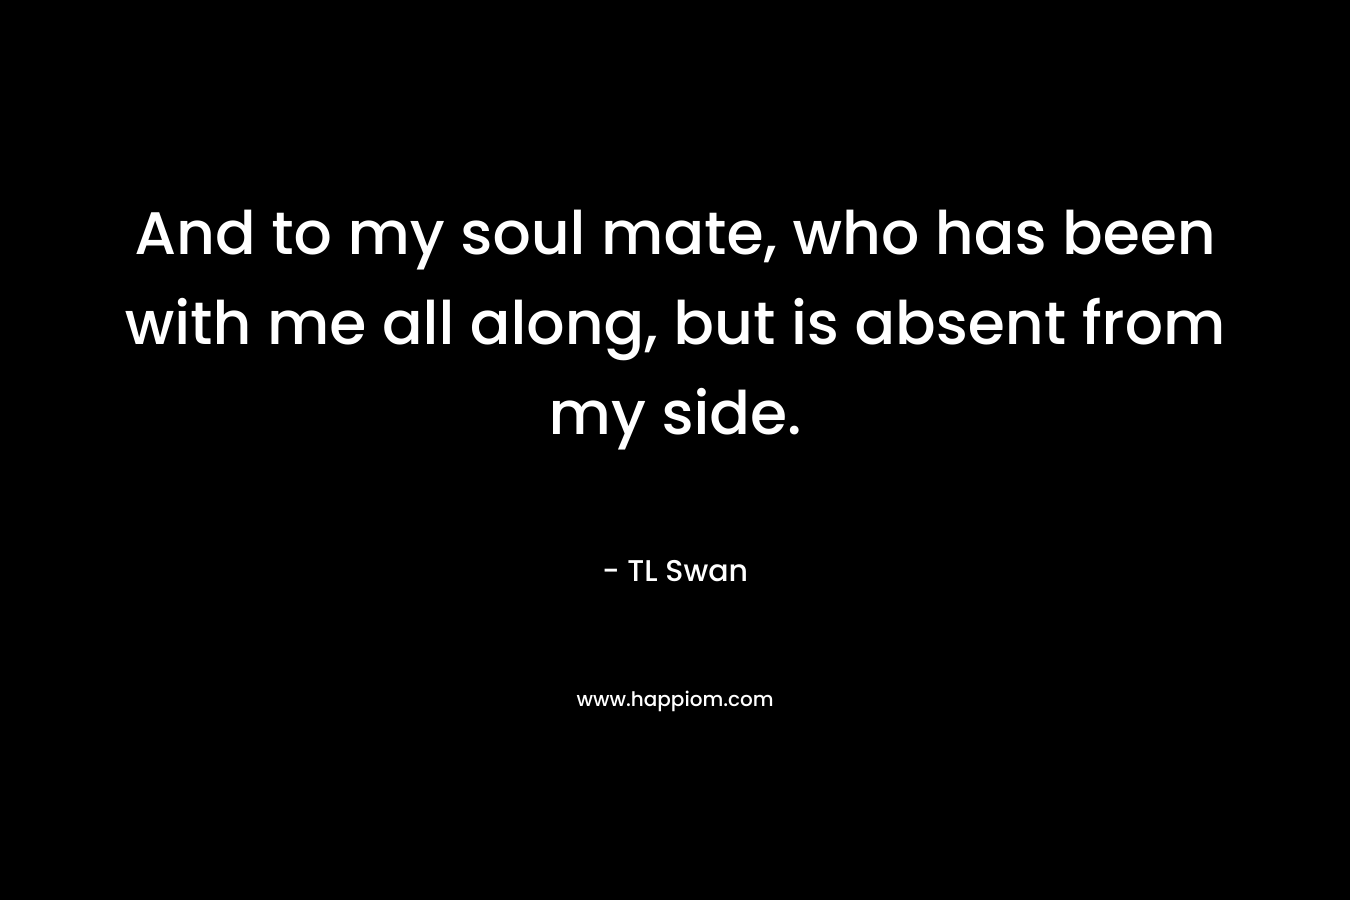 And to my soul mate, who has been with me all along, but is absent from my side. – TL Swan